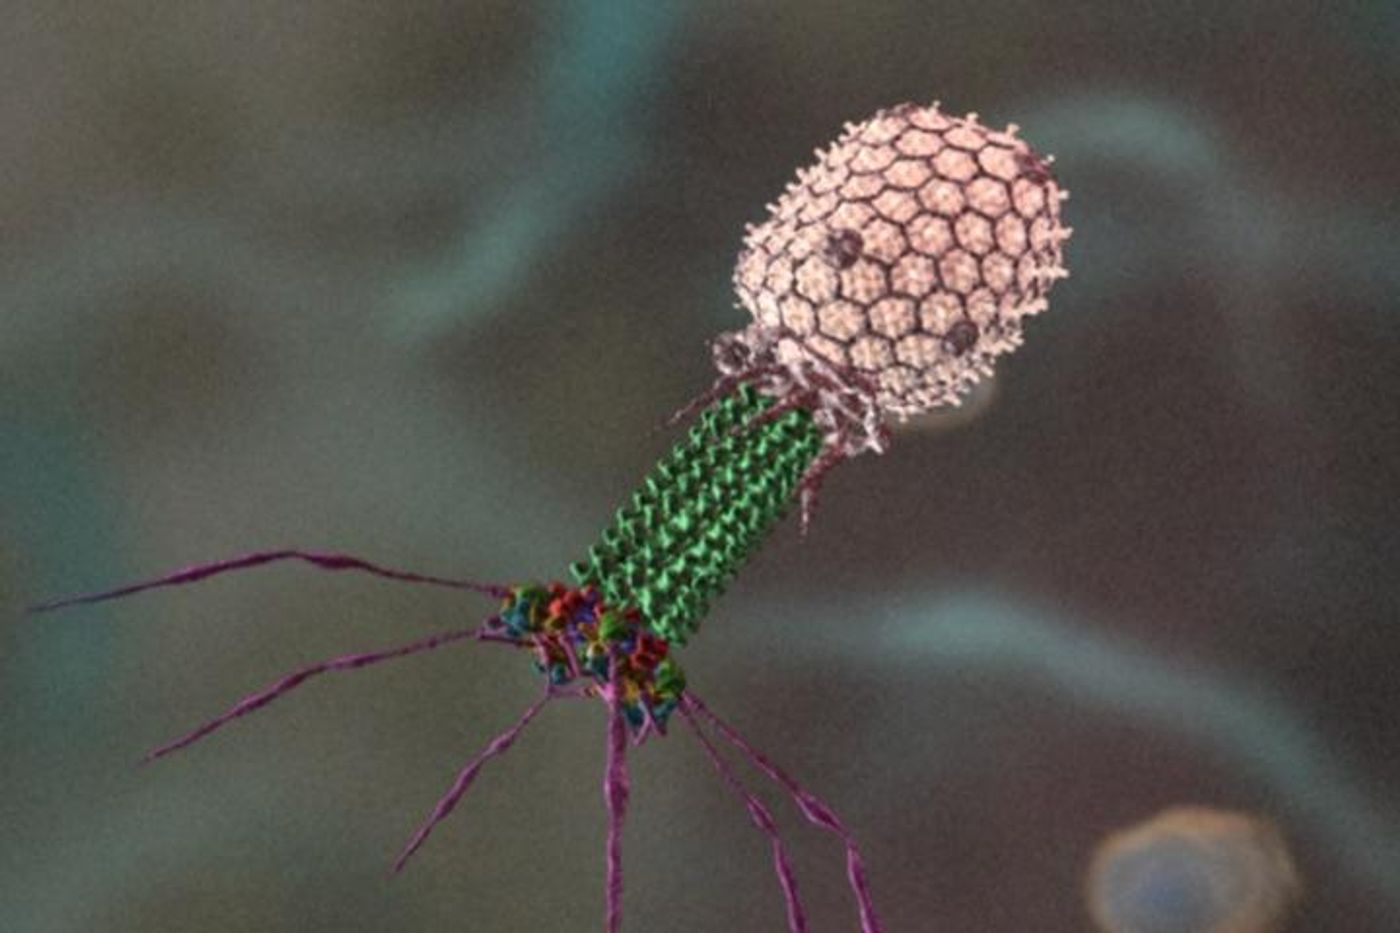 Reconstructed microscopy image of a bacteriophage, which is a virus that attacks bacteria. Credit: Purdue University and Seyet LLC